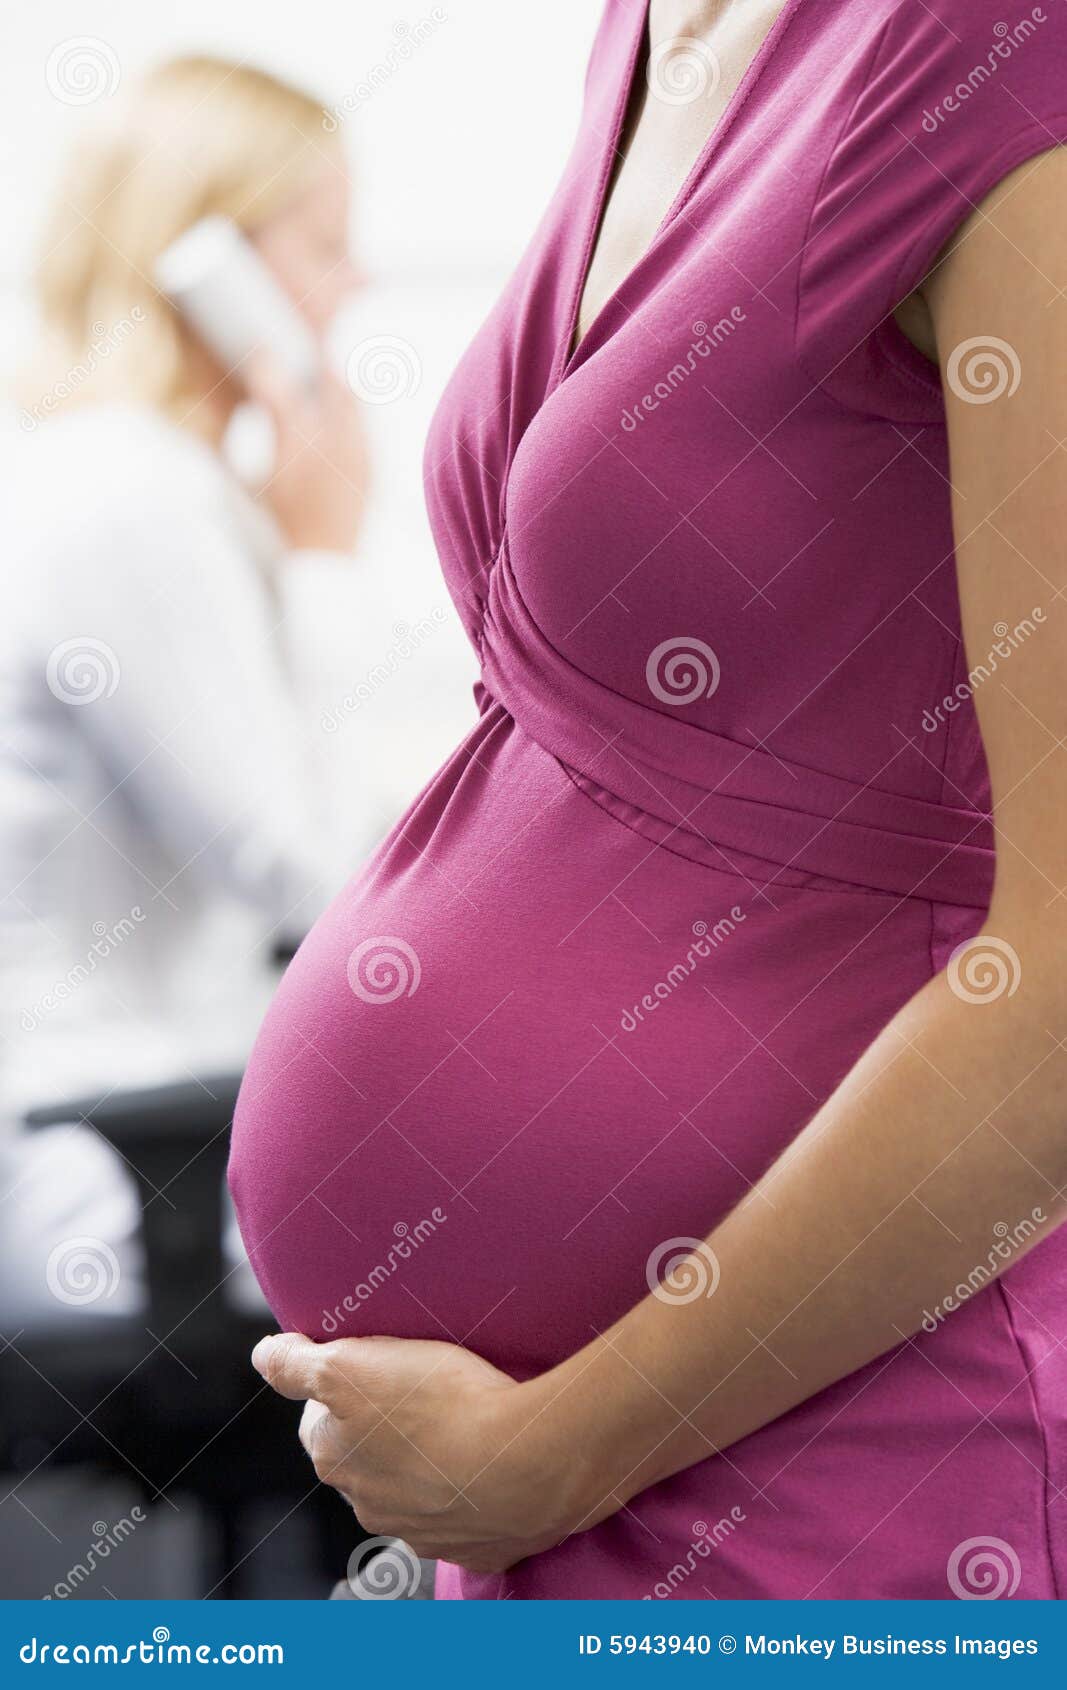 pregnant woman at work holding belly with coworker